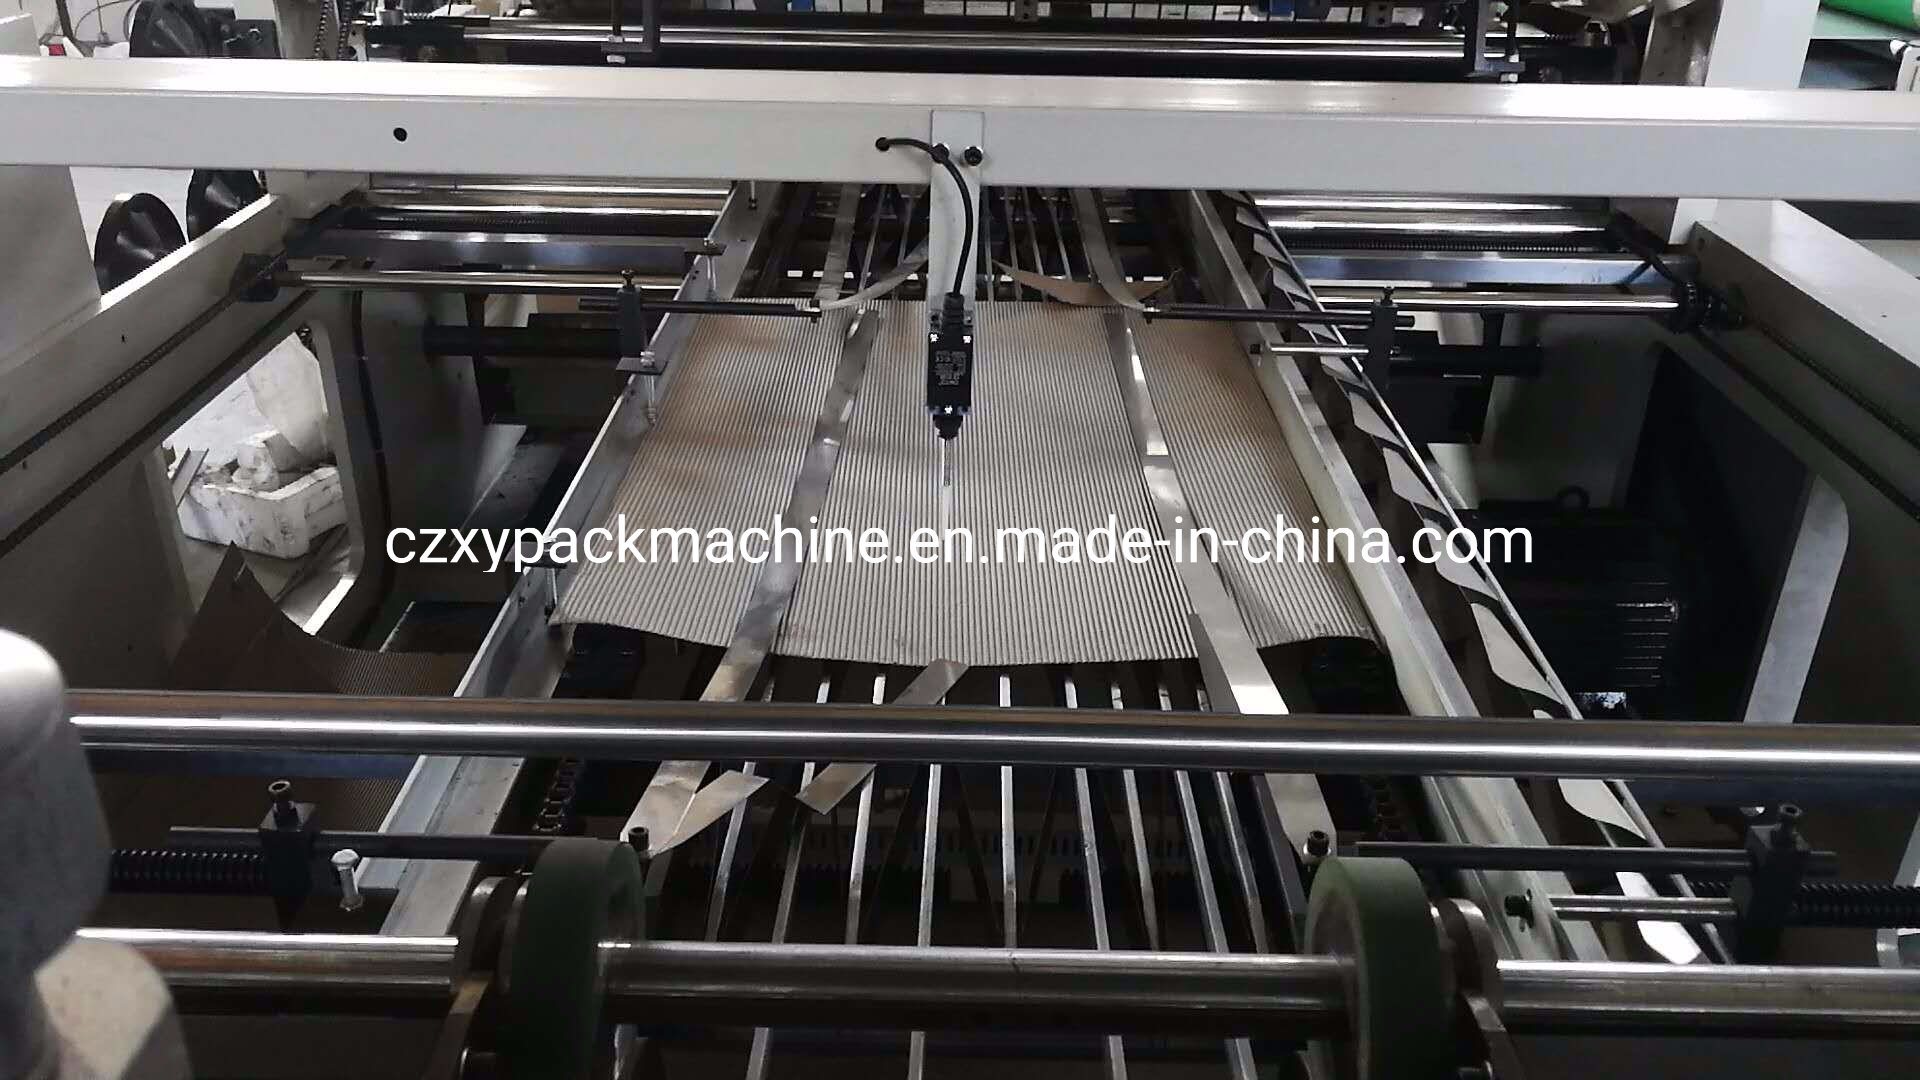 Multi-Functional Flute Laminator Machine for 3ply and 5ply Corrugated Box Production